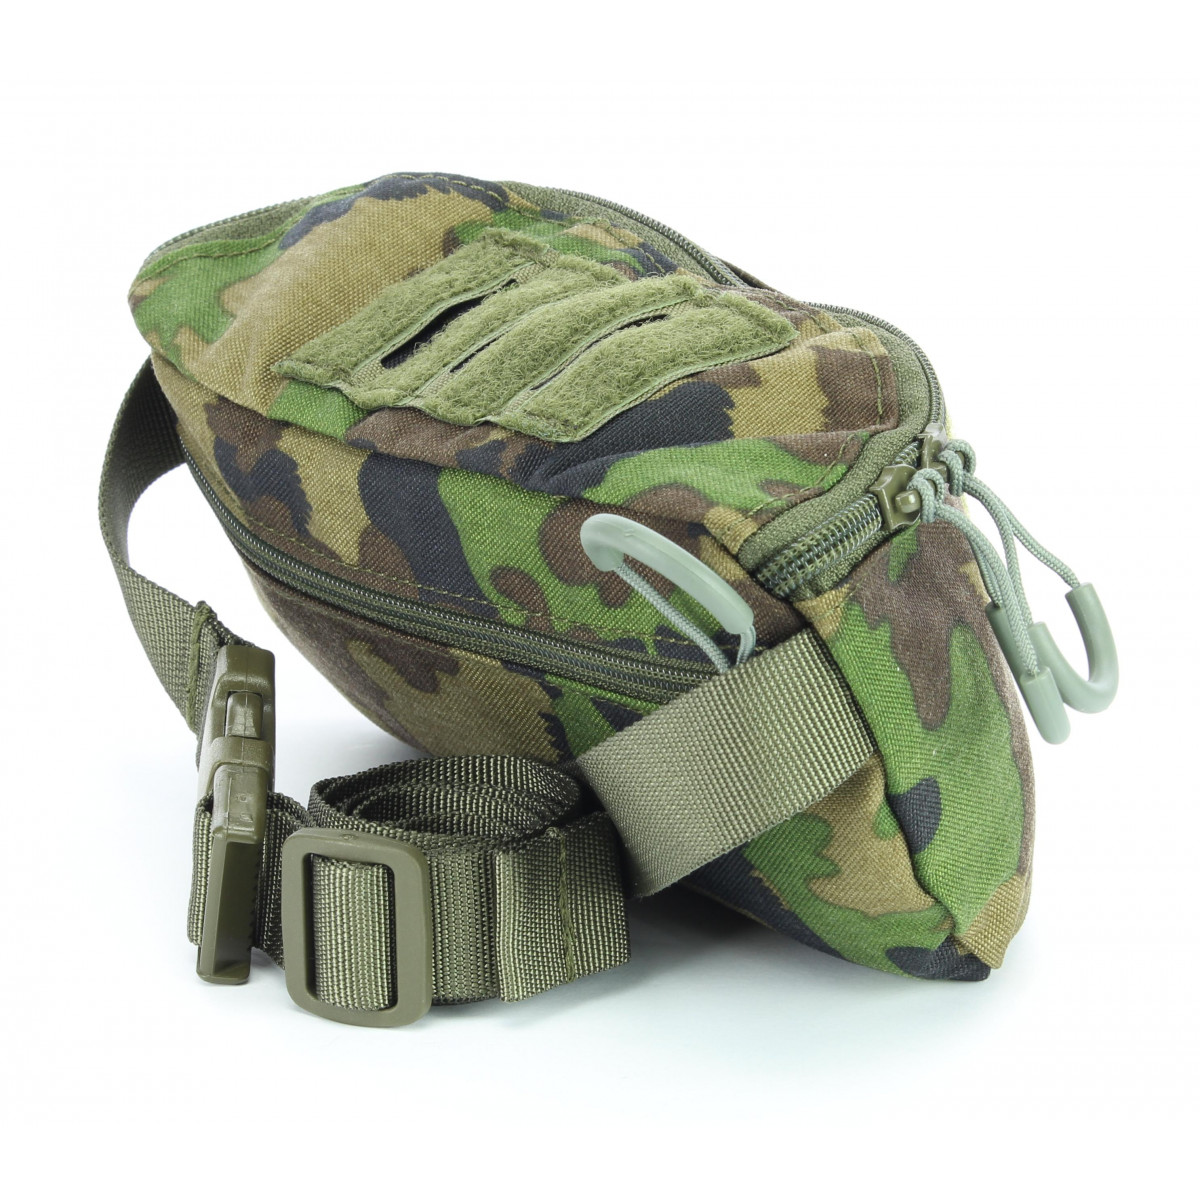 Hip bag / fanny pack in a tactical design, special edition